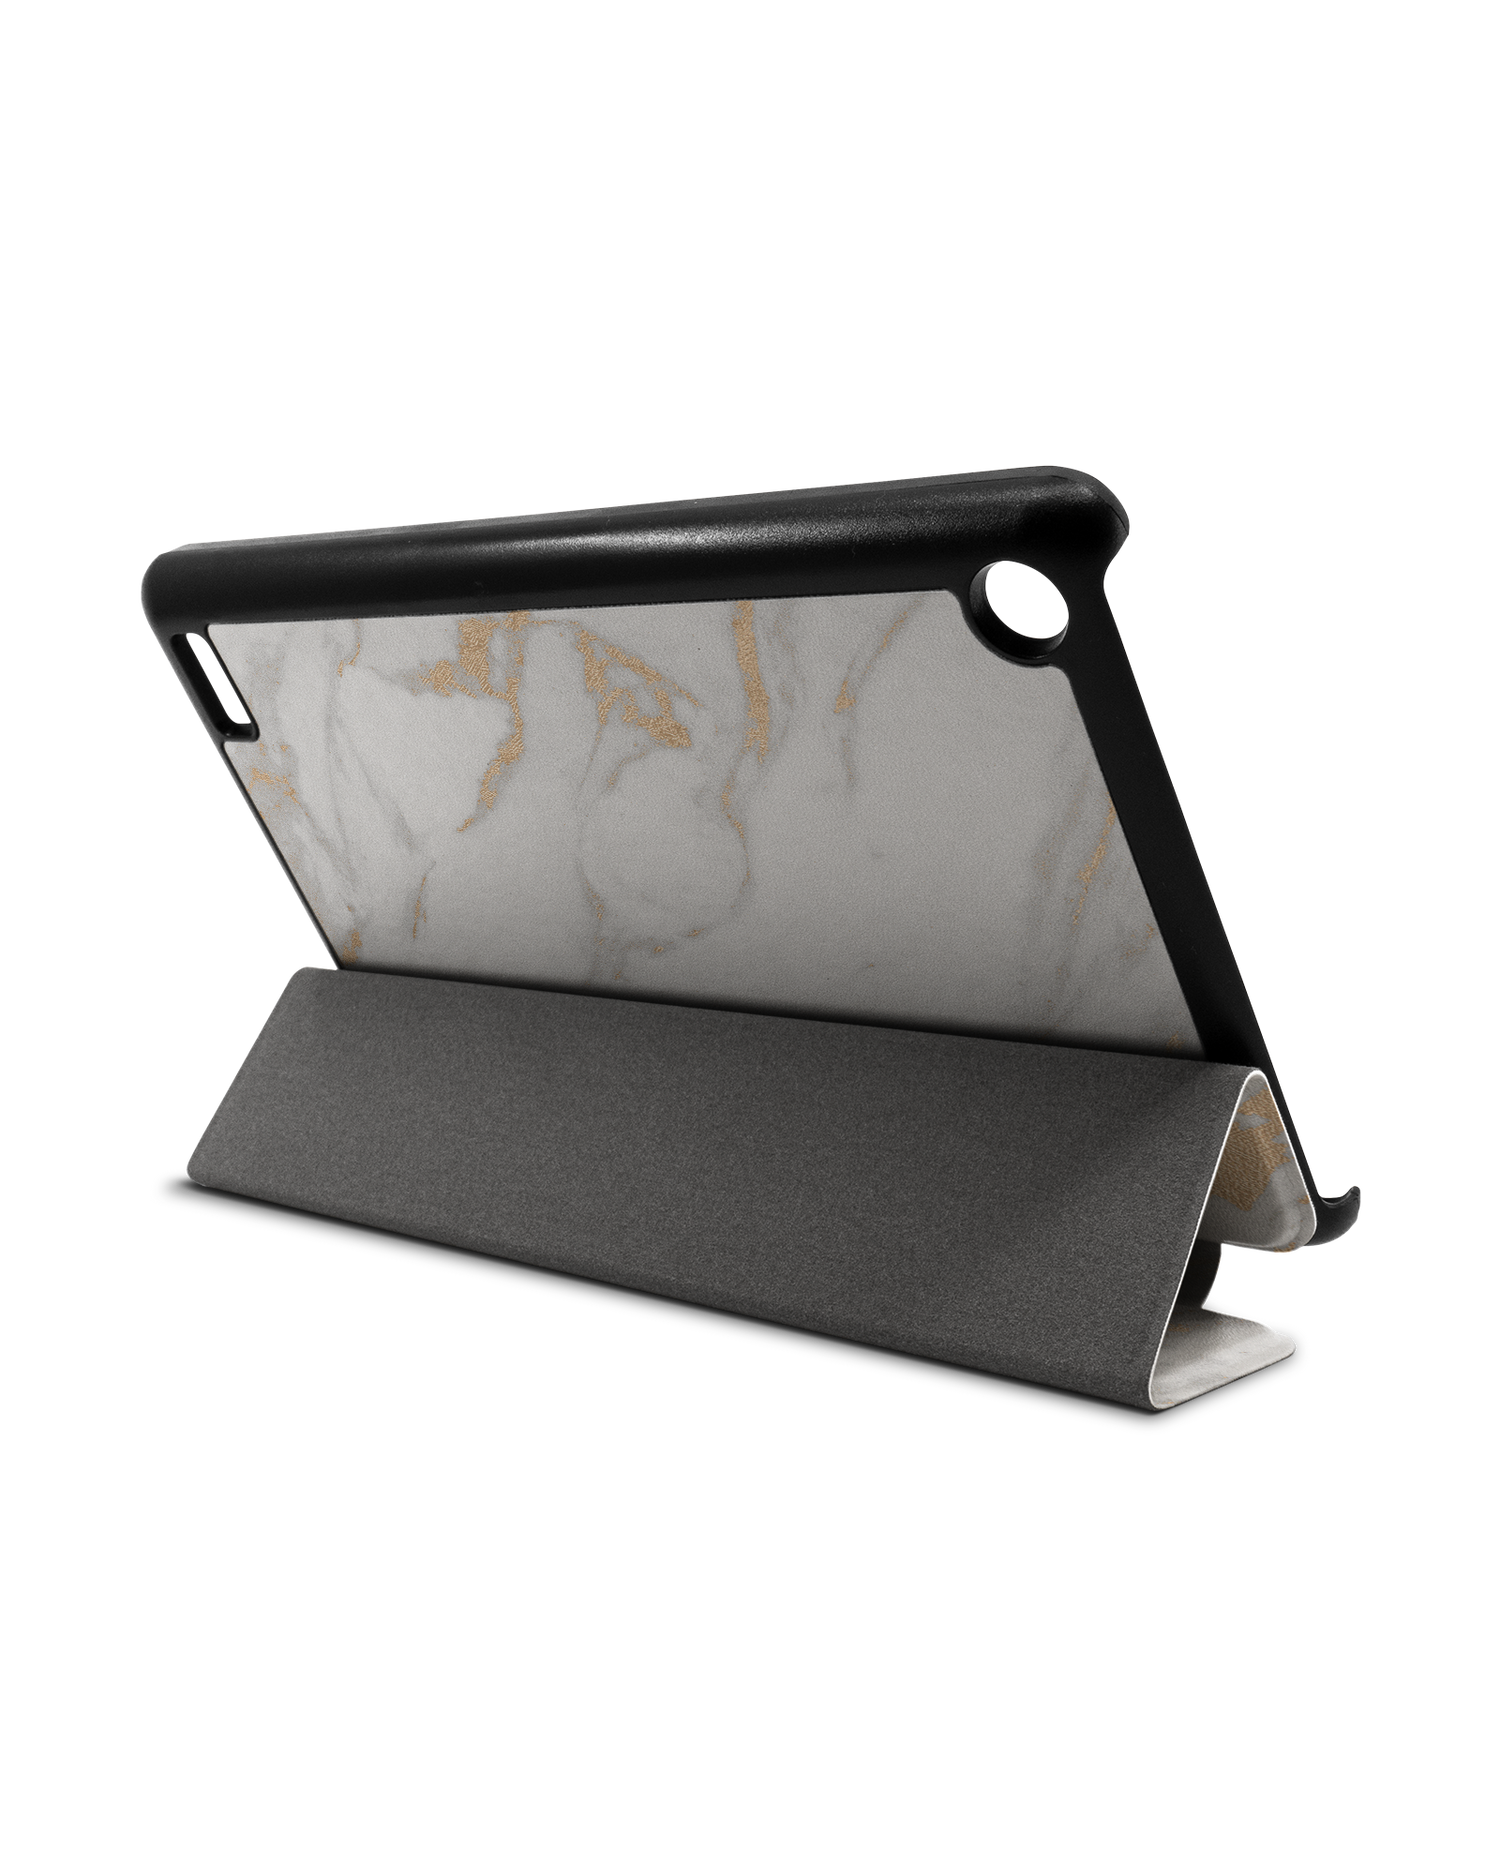 Gold Marble Elegance Tablet Smart Case for Amazon Fire 7: Used as Stand